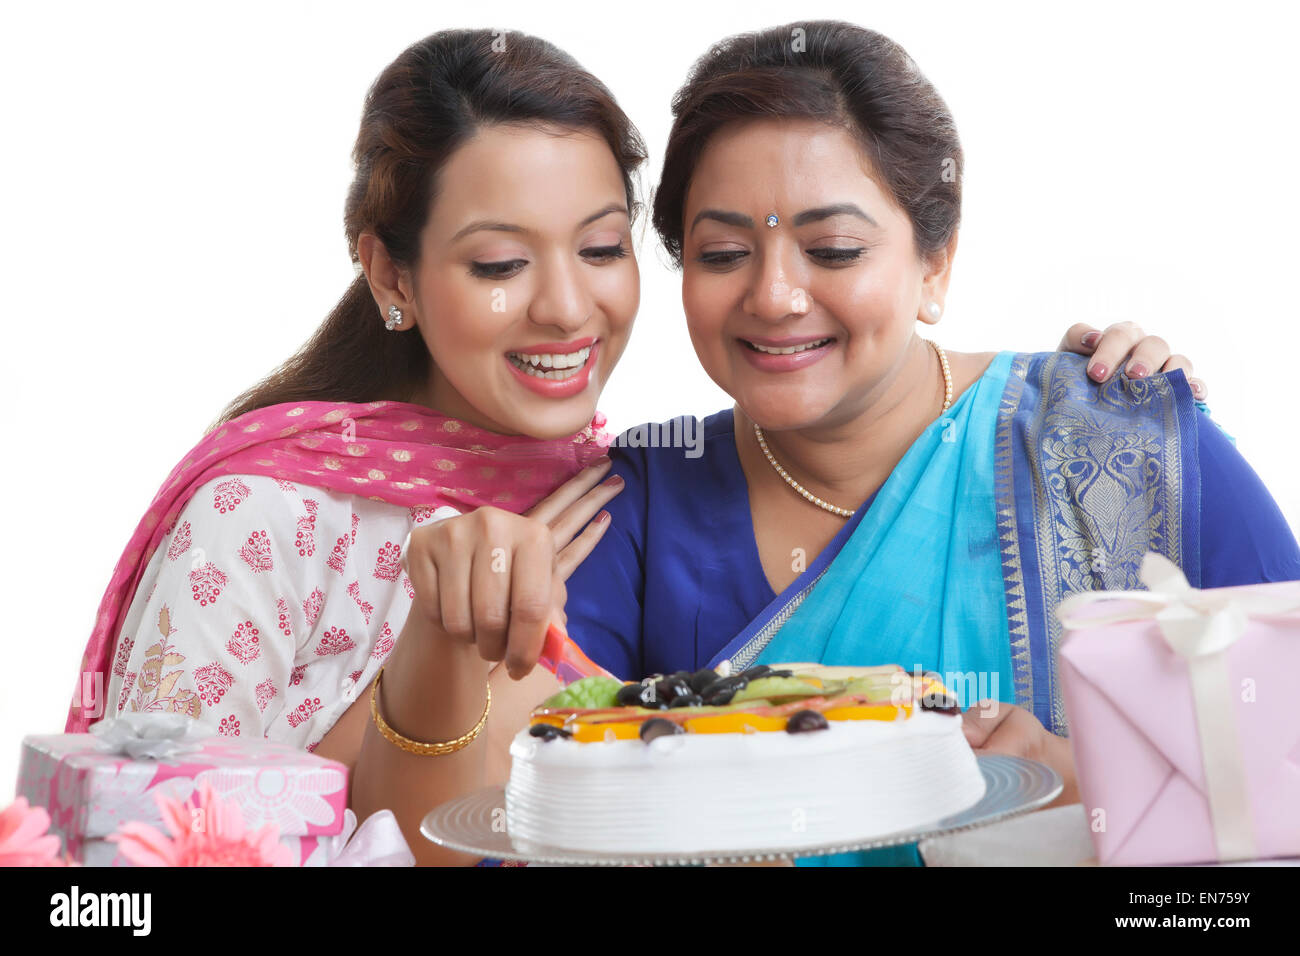 Woman cutting birthday cake while daughter looks on Stock Photo